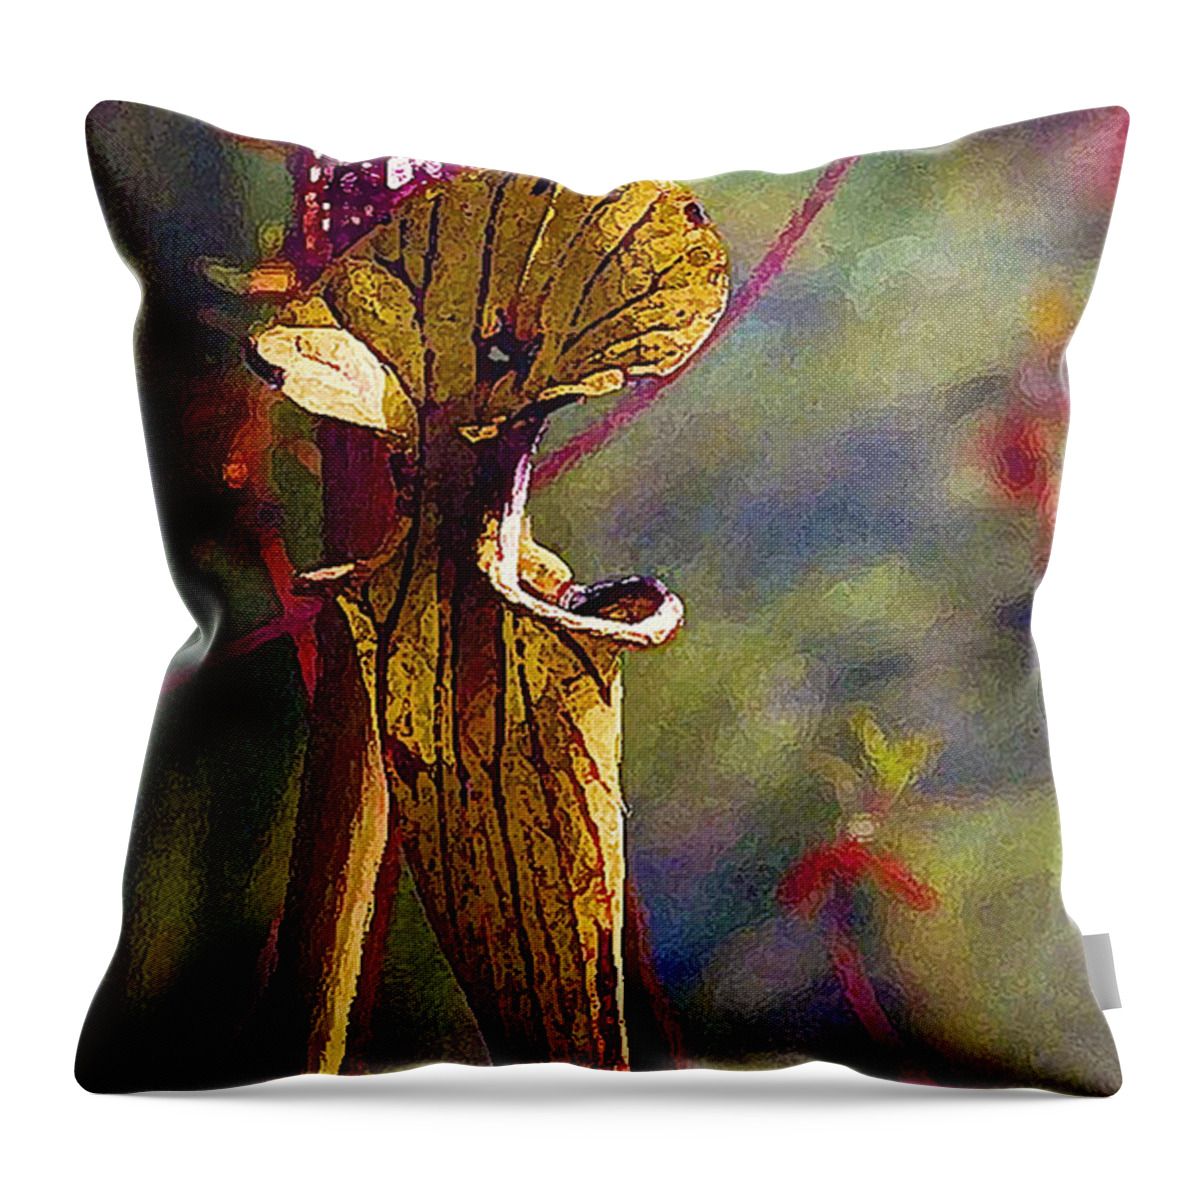 Pitcher Plant Throw Pillow featuring the photograph Pitcher Plant by Janis Senungetuk